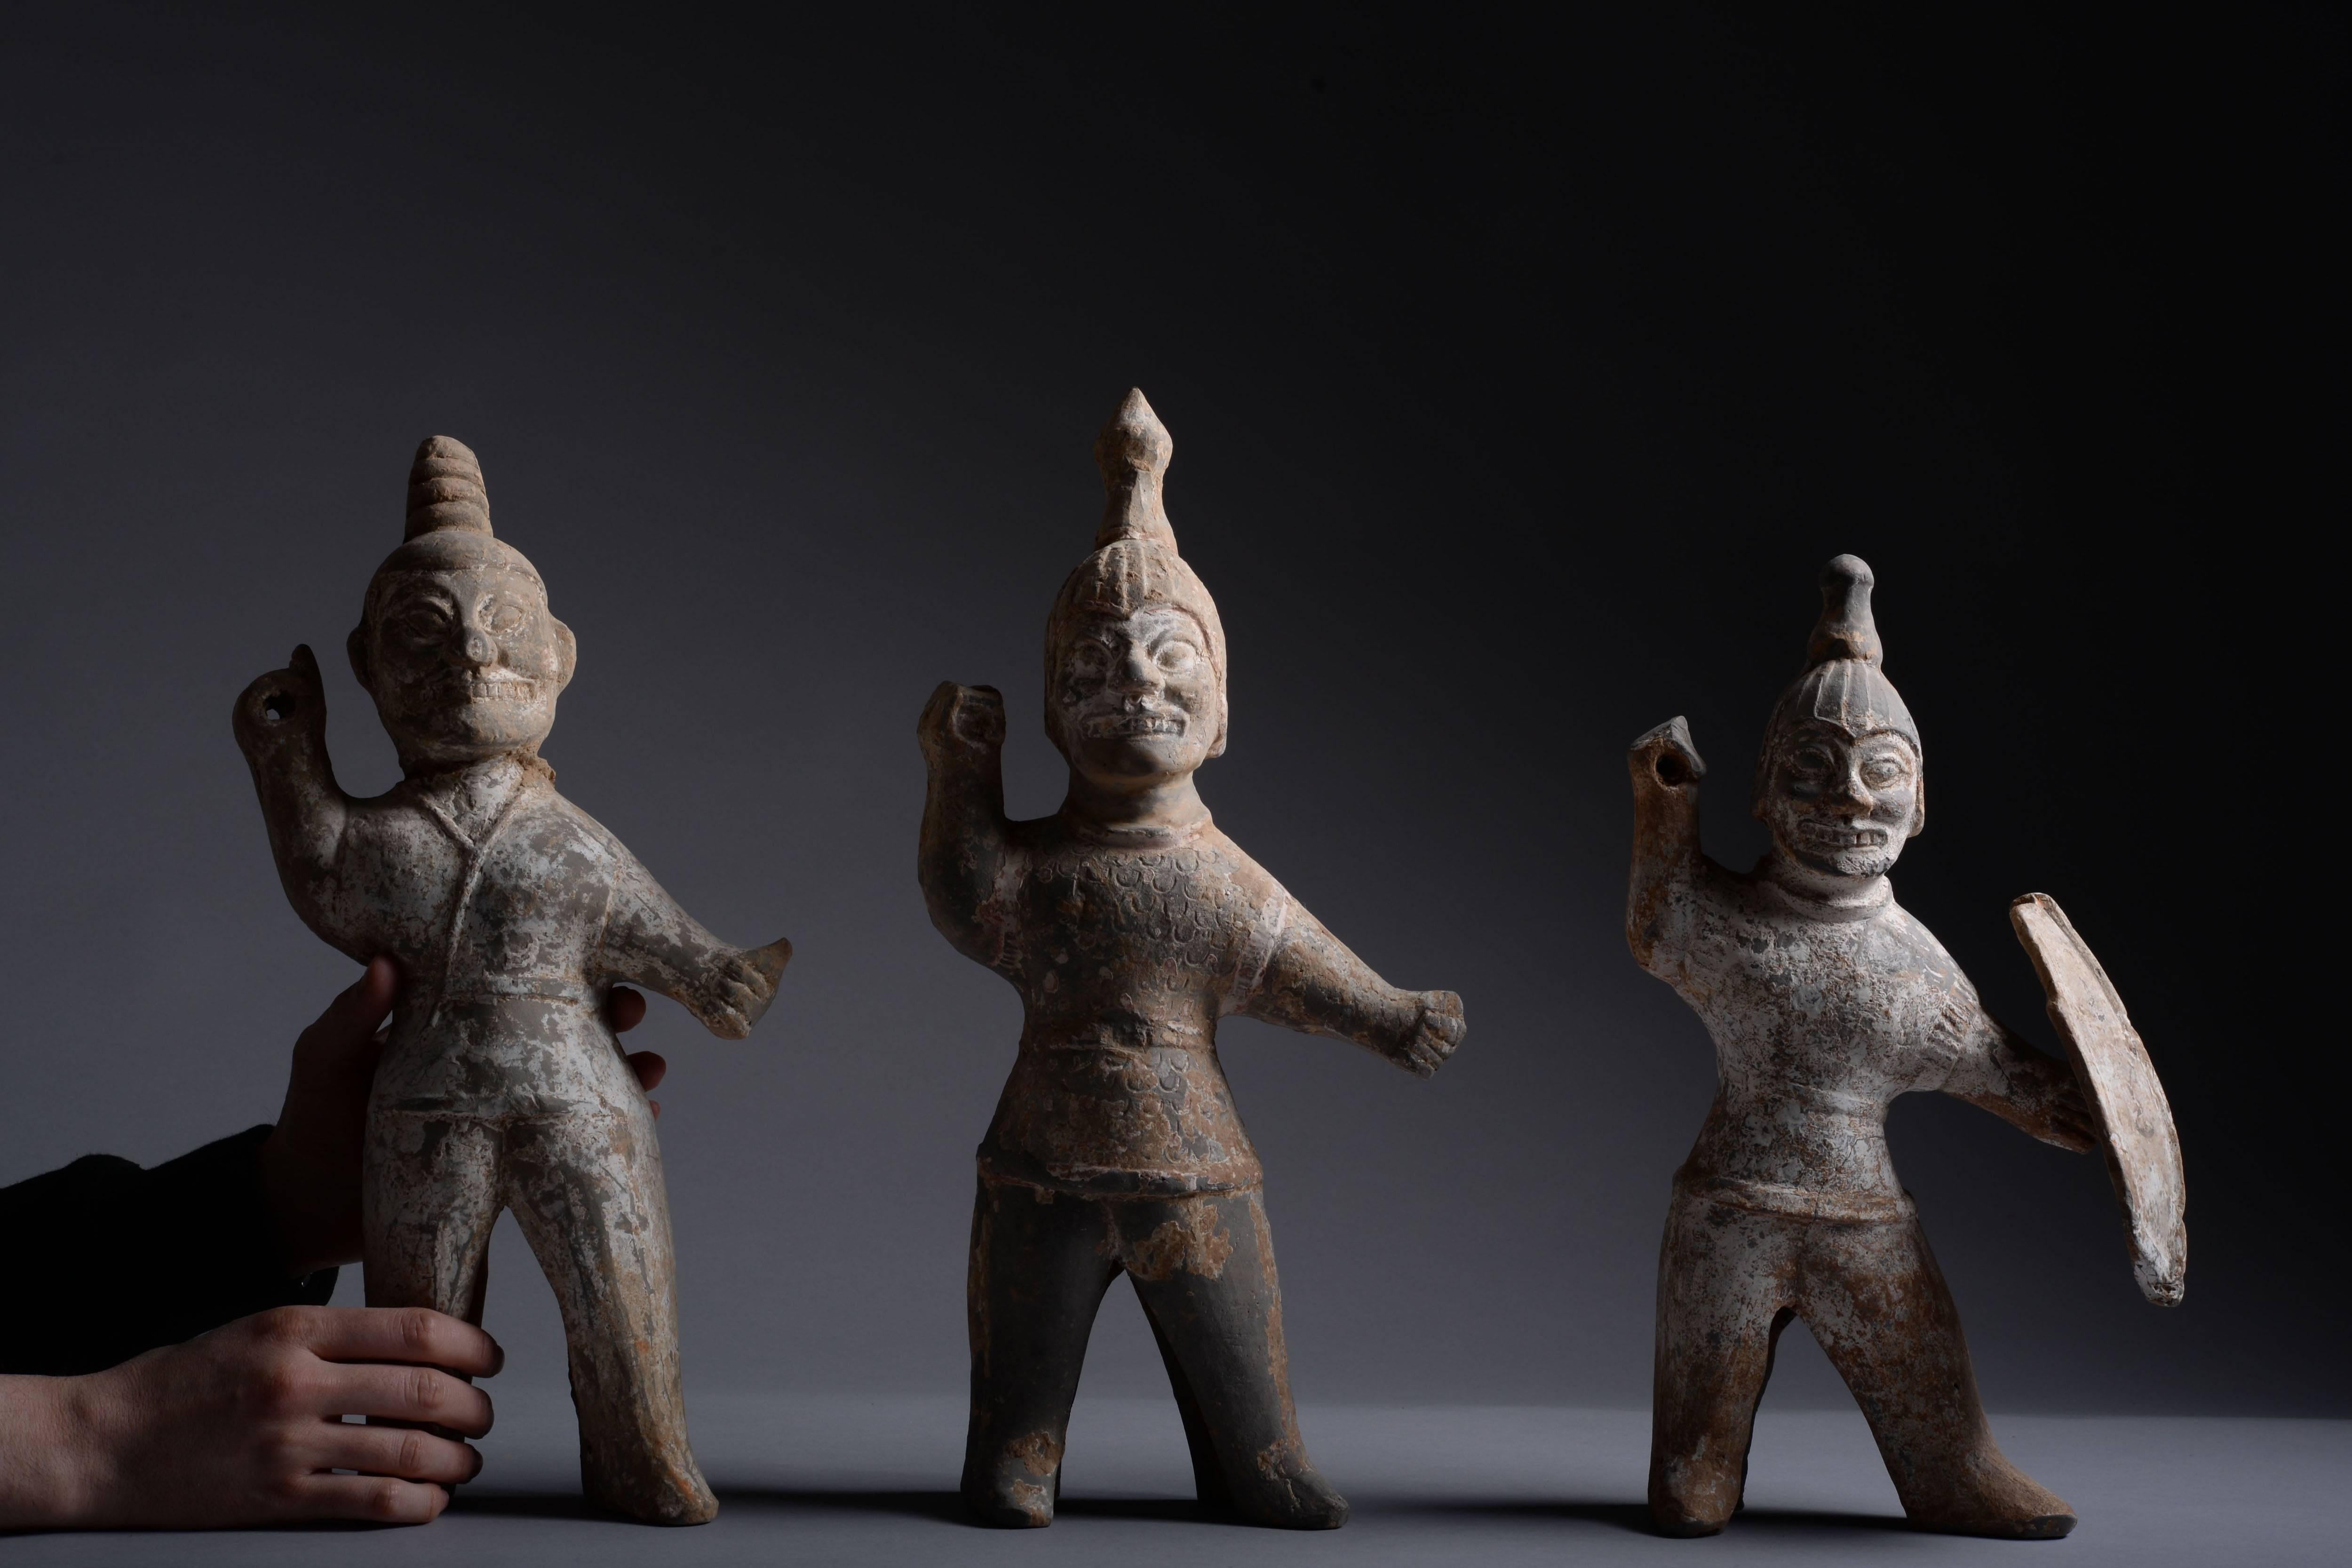 A group of three rare ancient Chinese terracotta warriors, dating to the Western Jin dynasty, 265–316 AD.

Western Jin terracotta figures such as these are some of the most distinctive mingqi known from ancient China. With their fierce, powerful